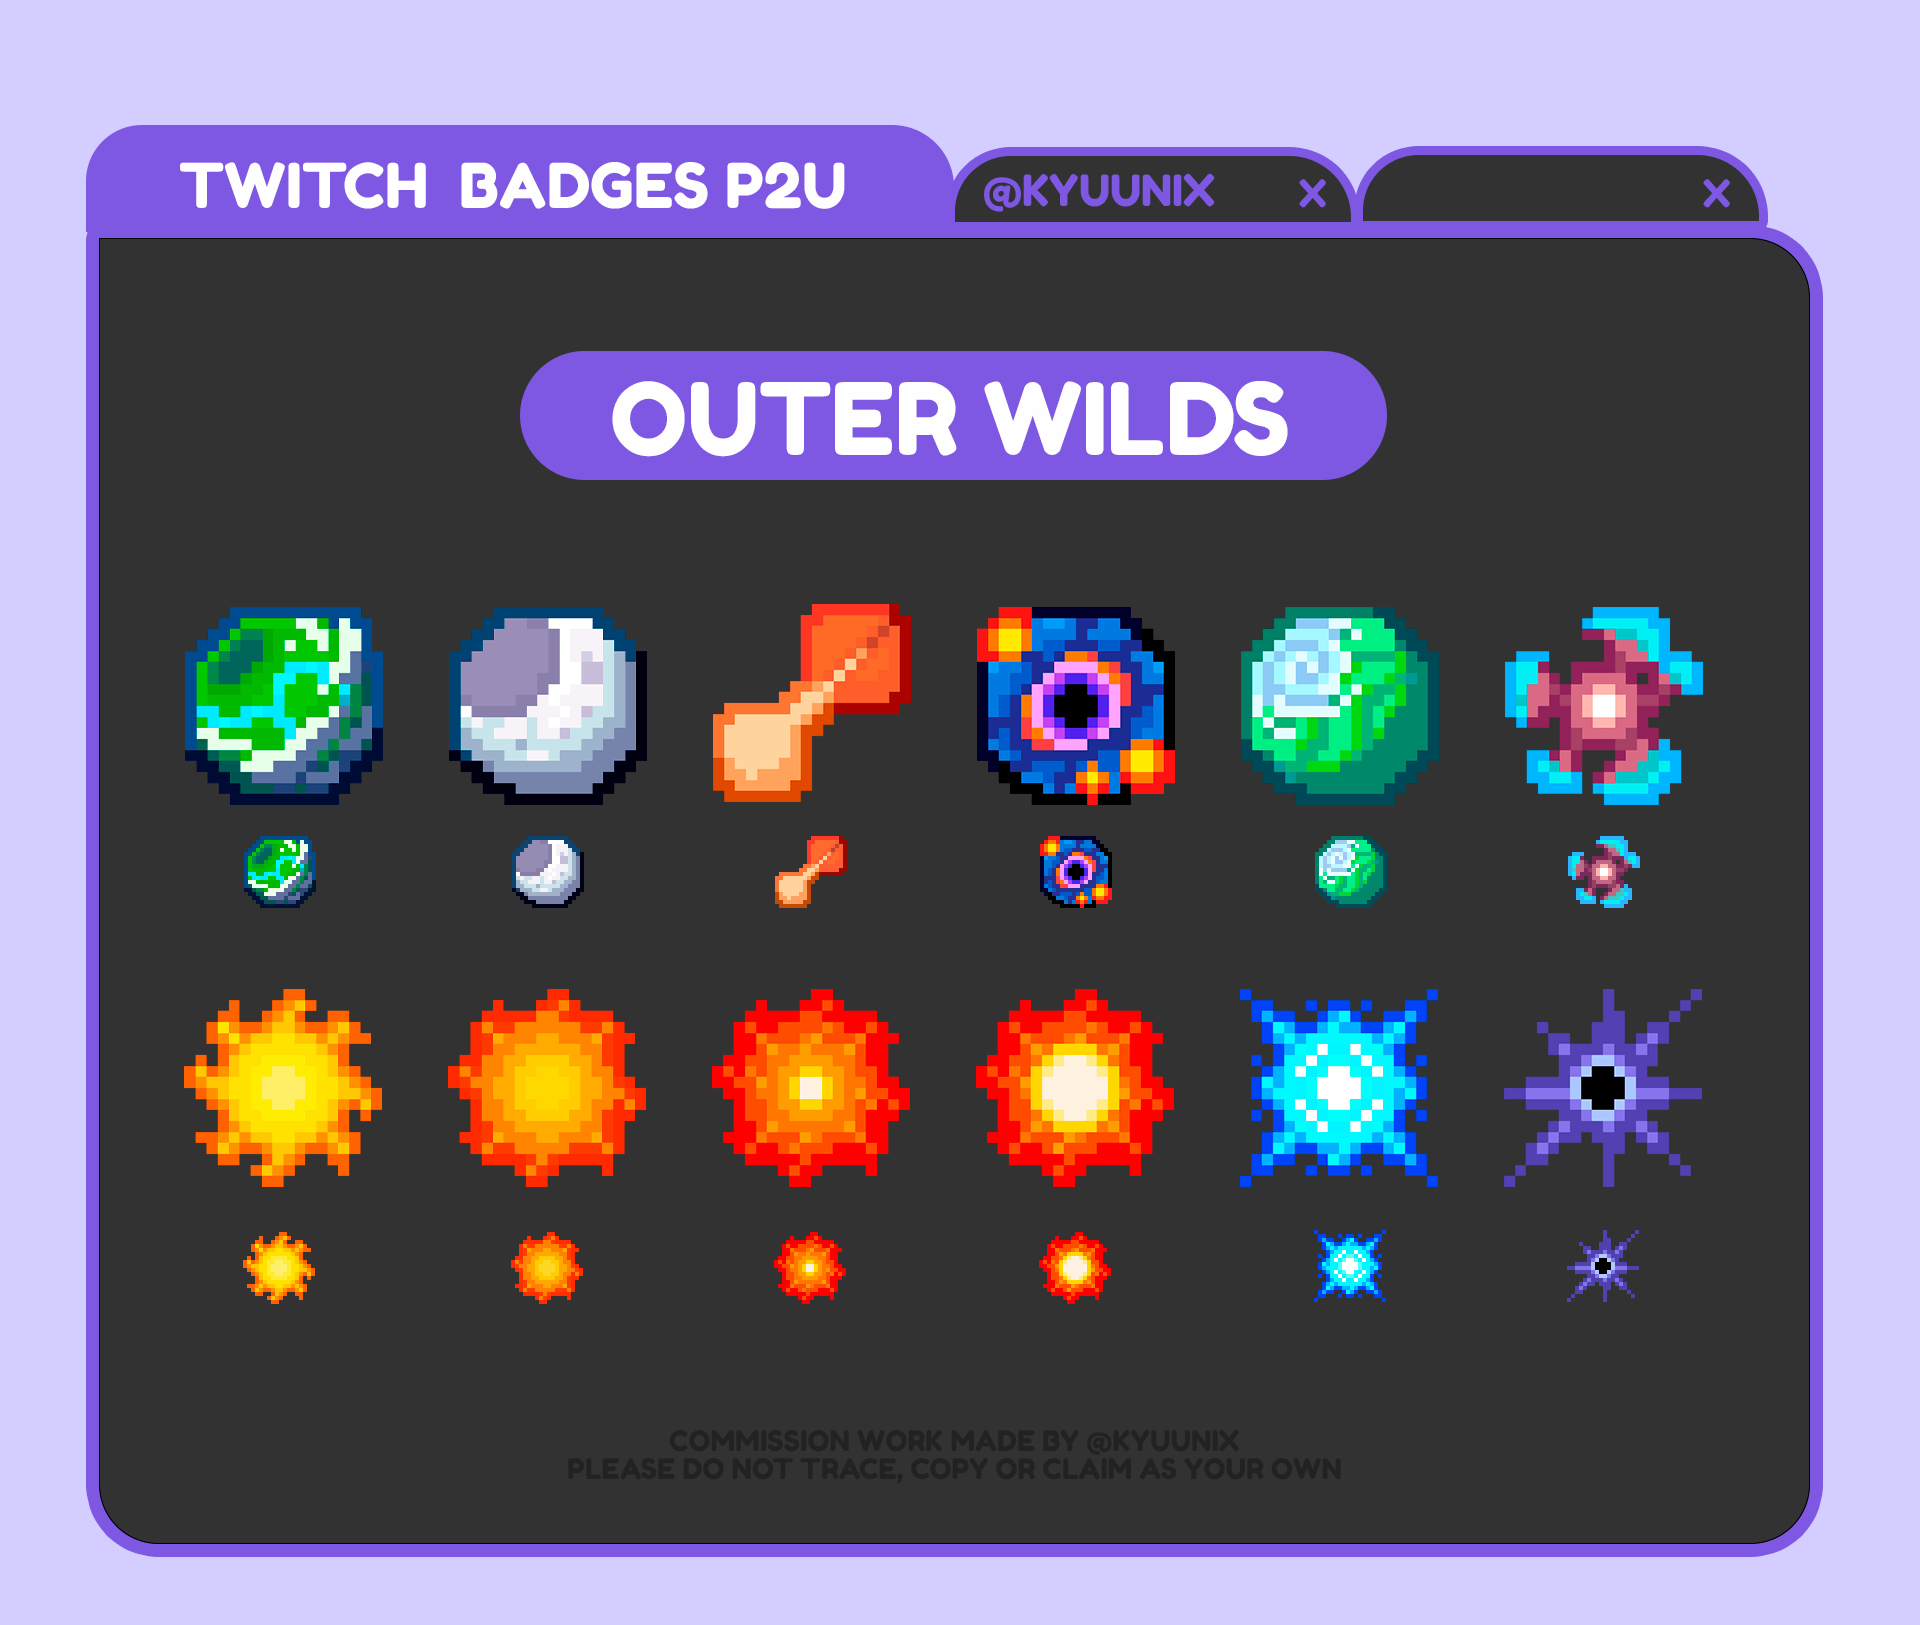 Outer Wilds badges are now available in my shop!!